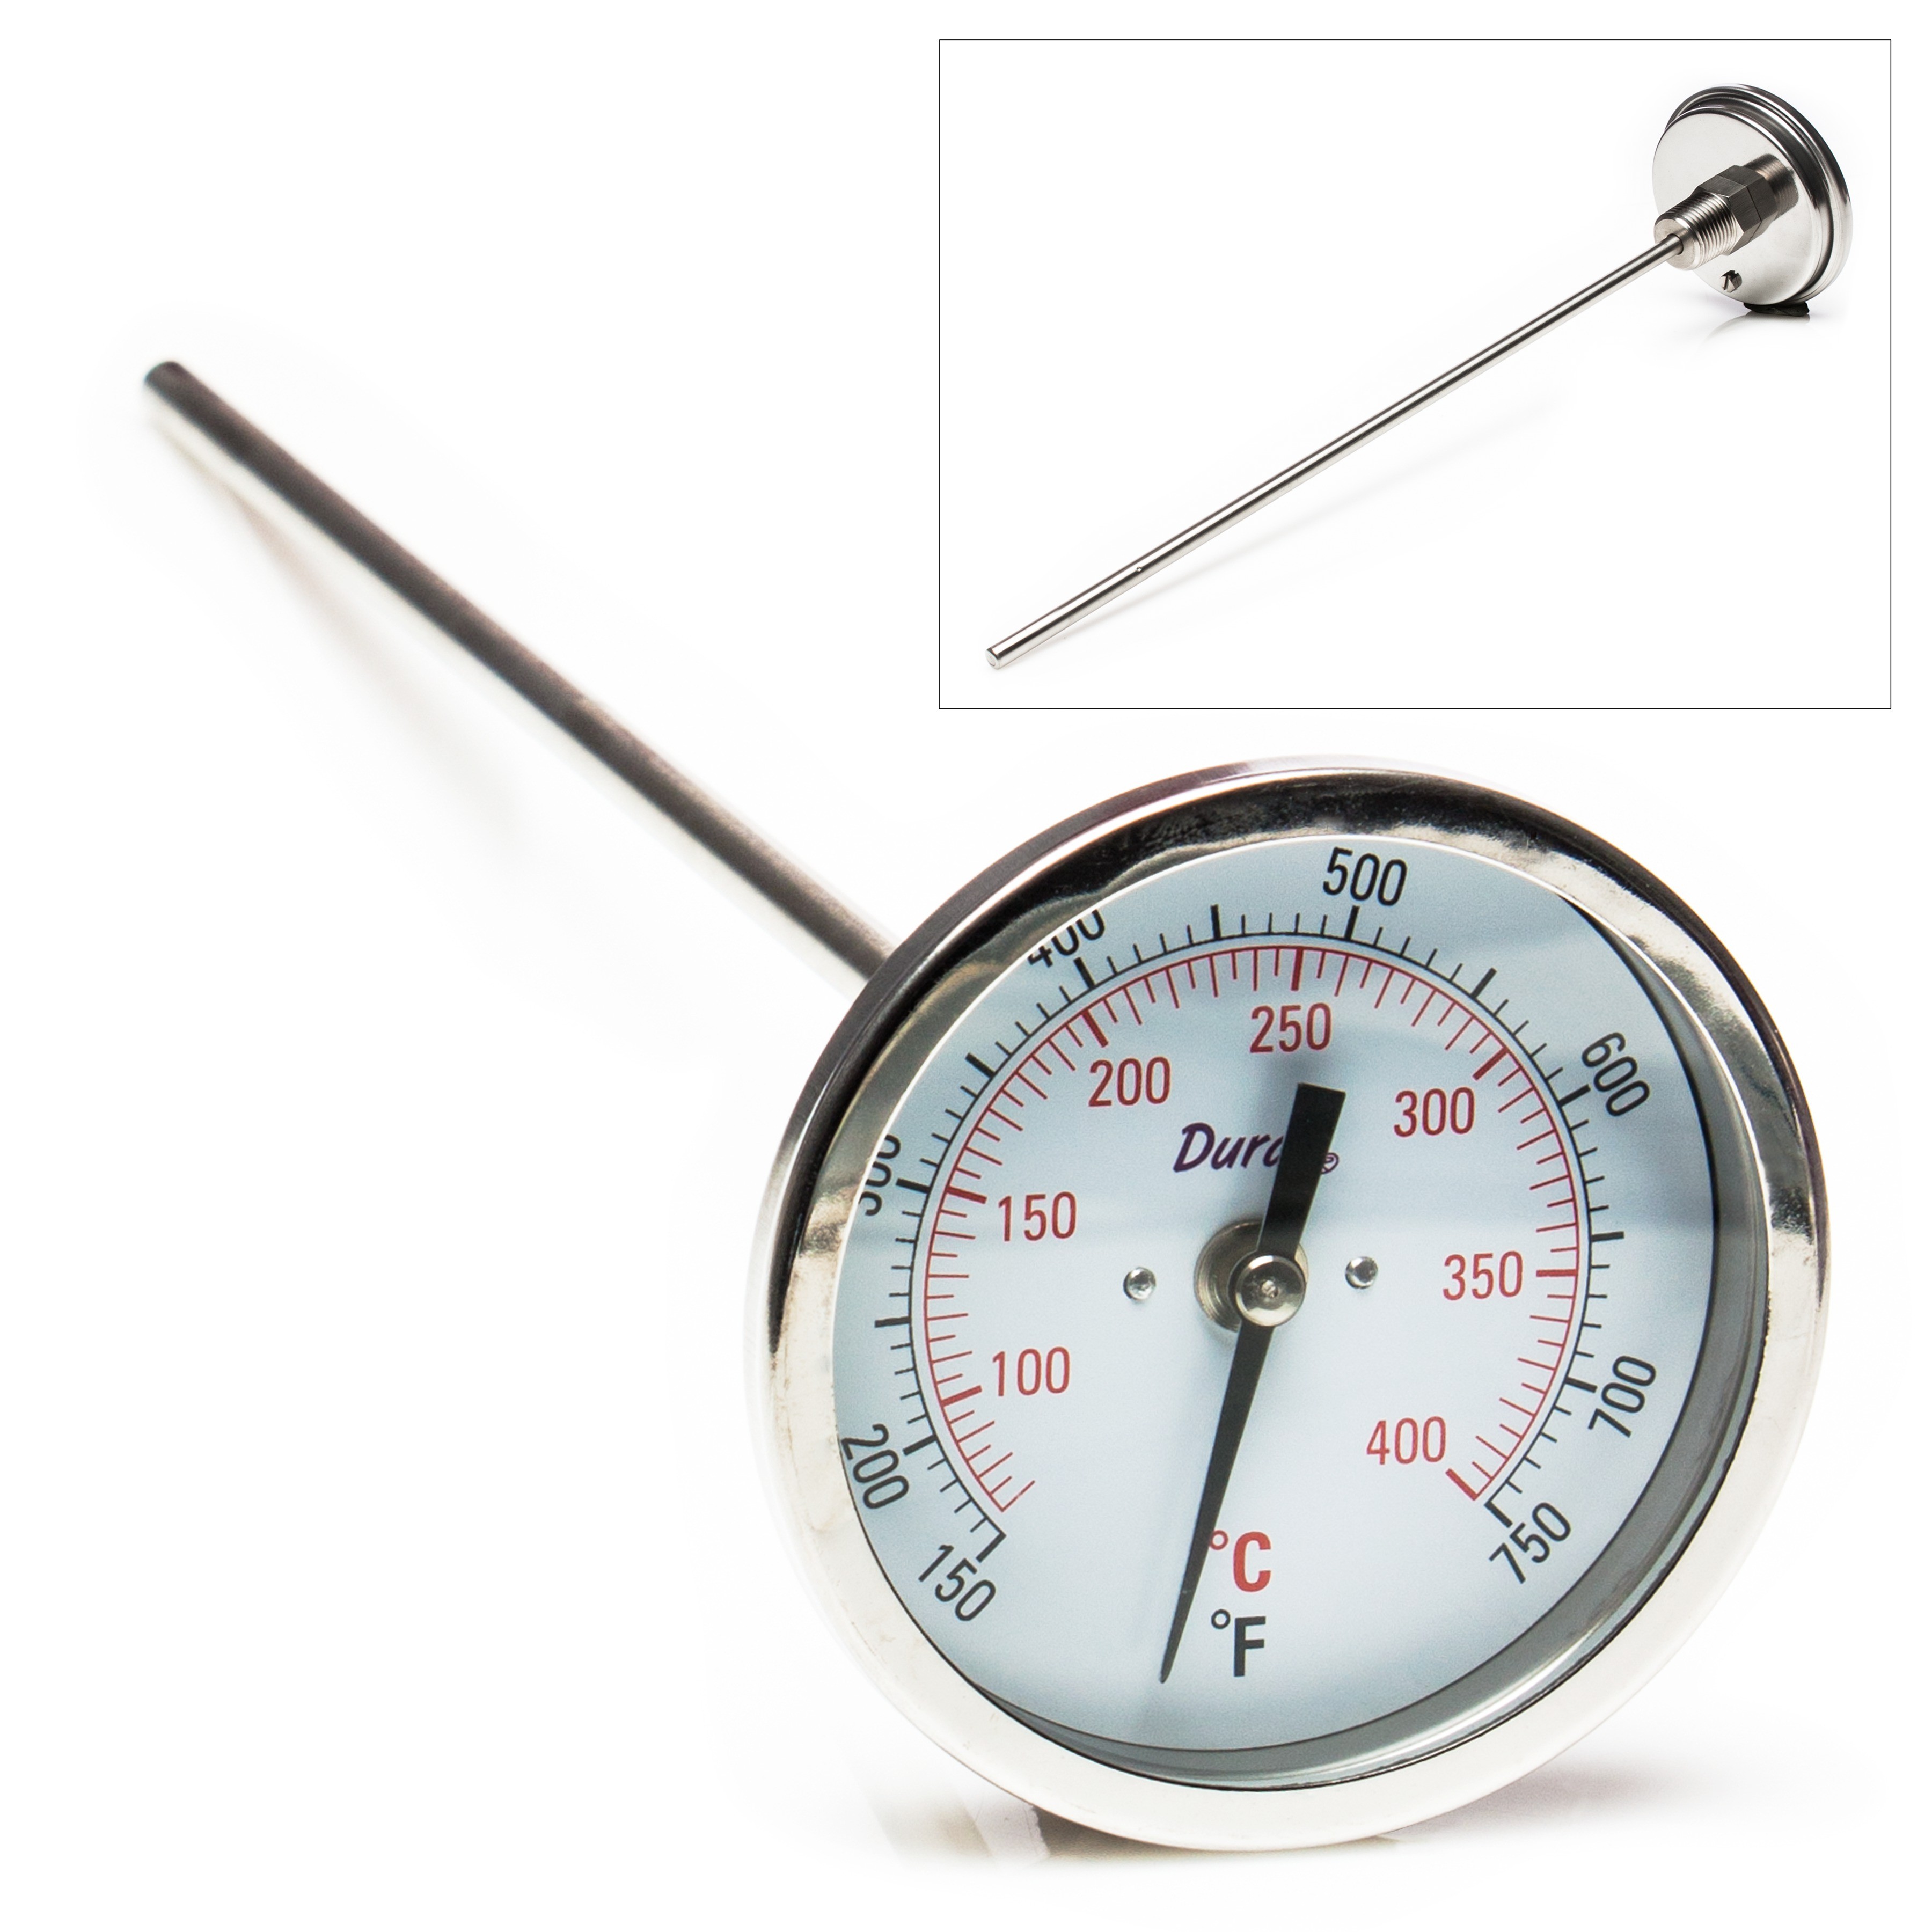 Hanging Window Dial Thermometer